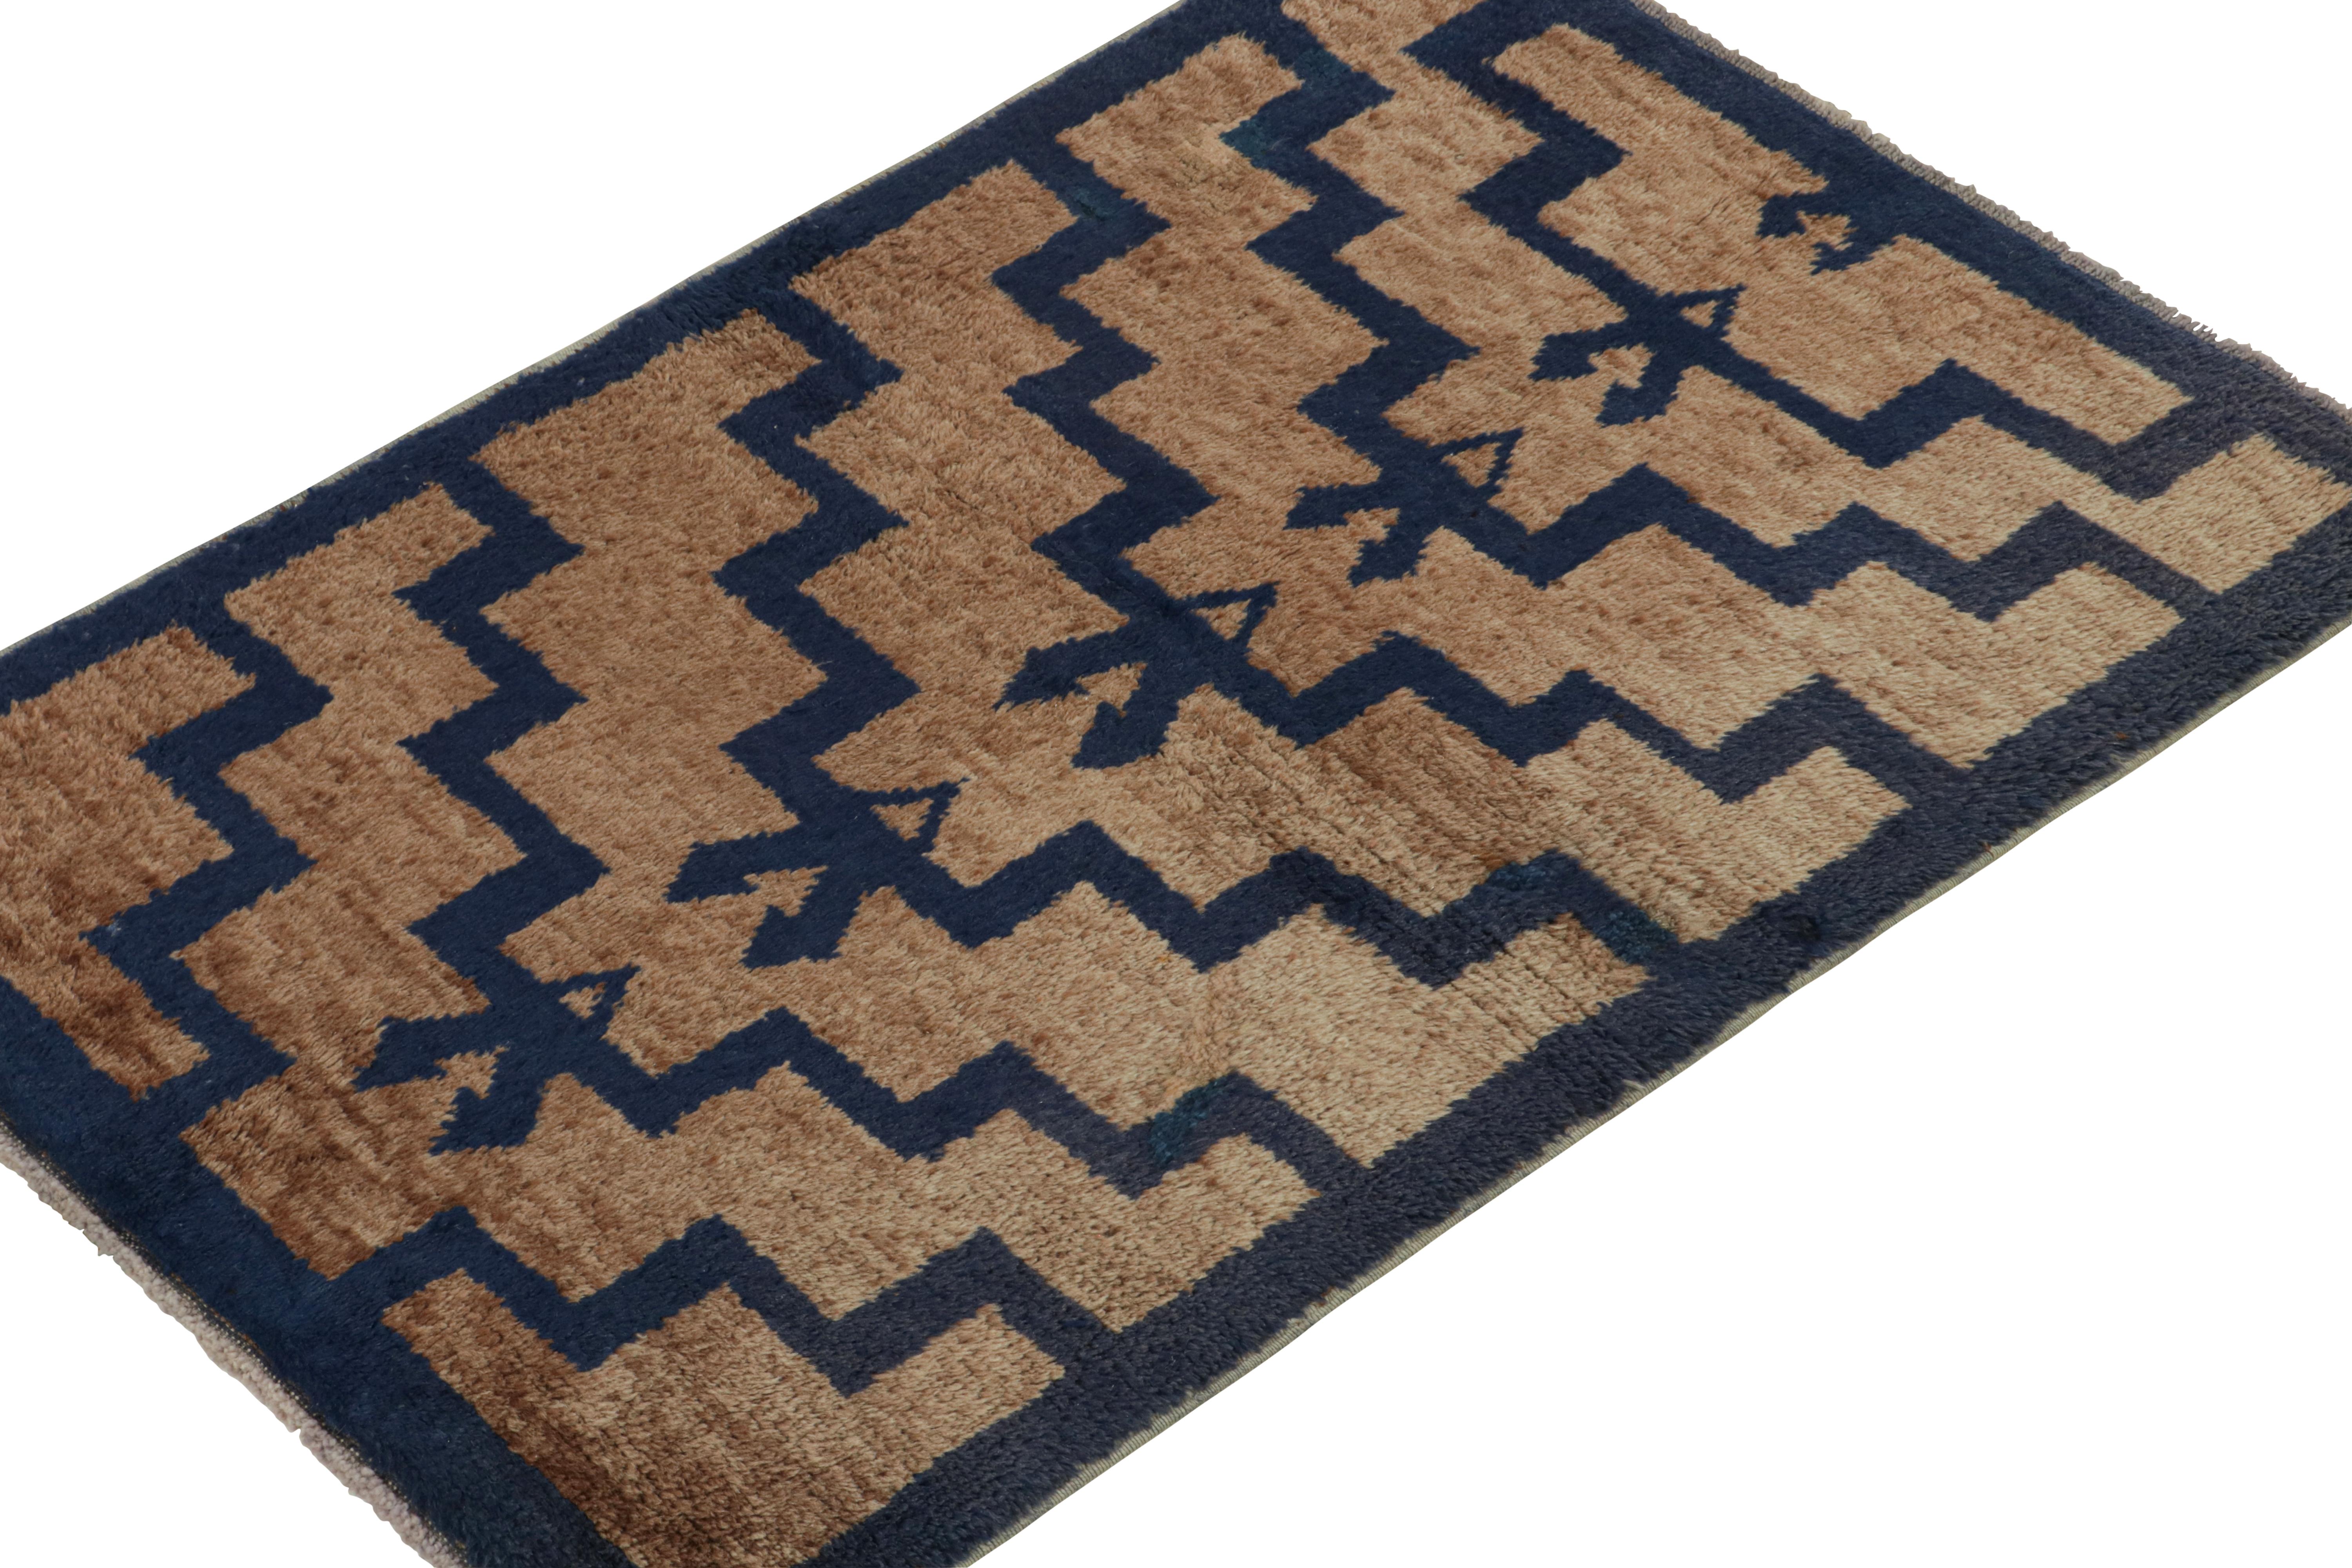 Tribal Vintage Tulu Shag Rug in Brown and Navy Blue Geometric Pattern by Rug & Kilim For Sale